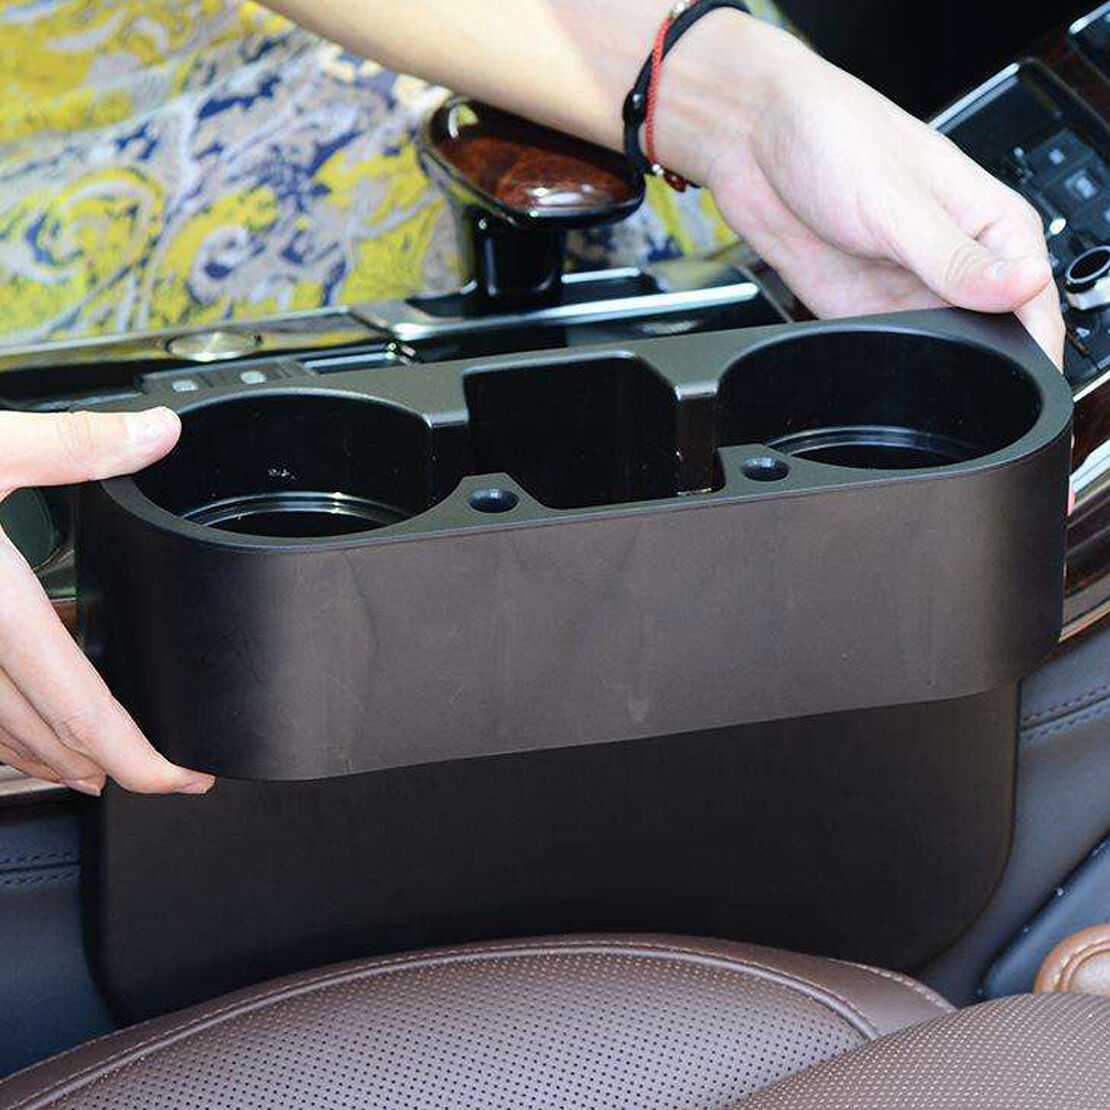 Universal Black Car Seat Seam Wedge Cup Drink Holder Mobile Shelf Container Box